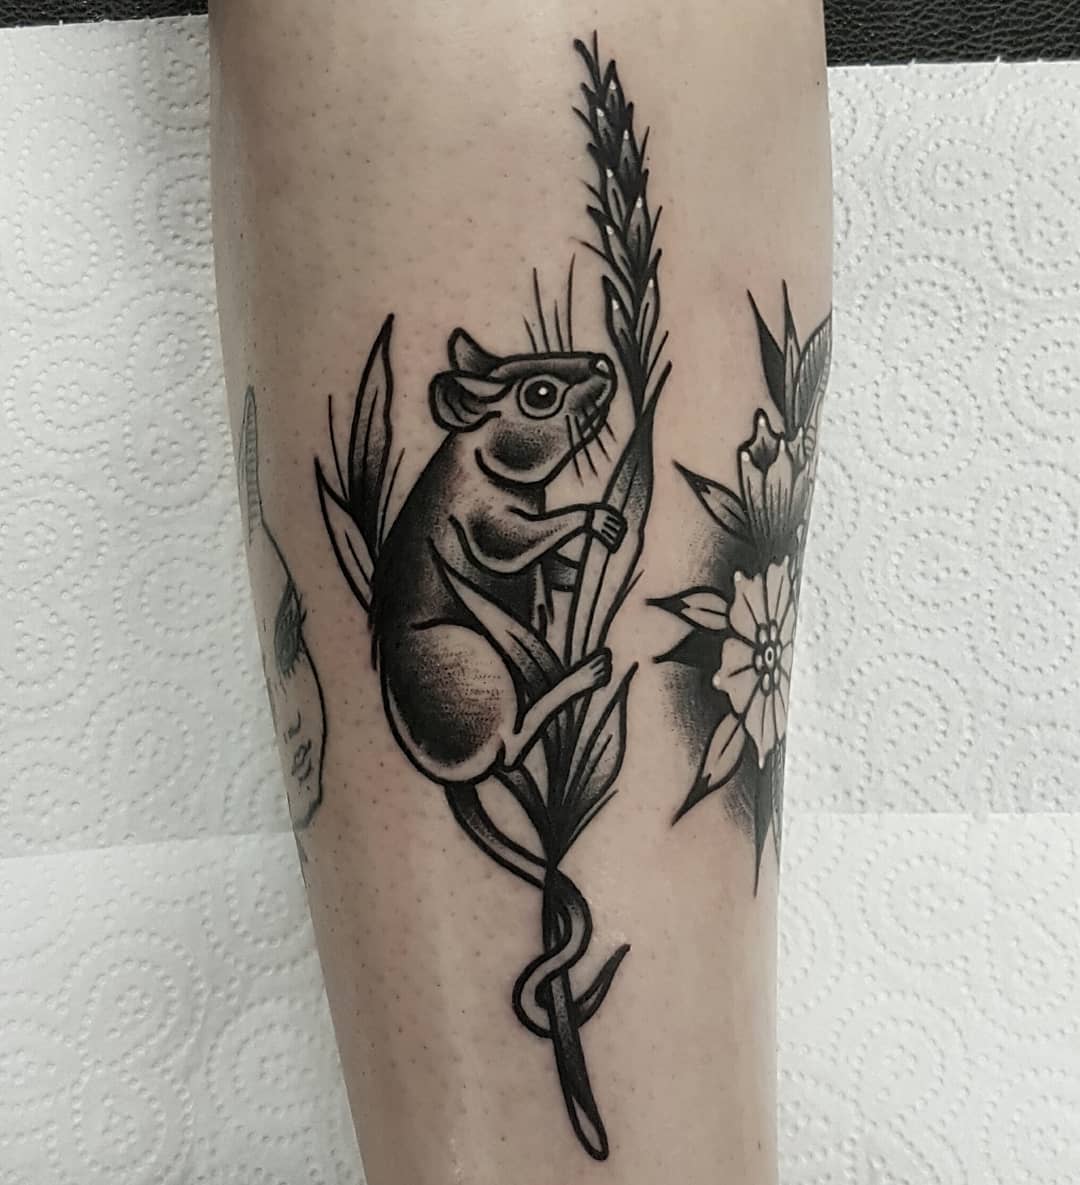 Black mouse by @rabtattoo